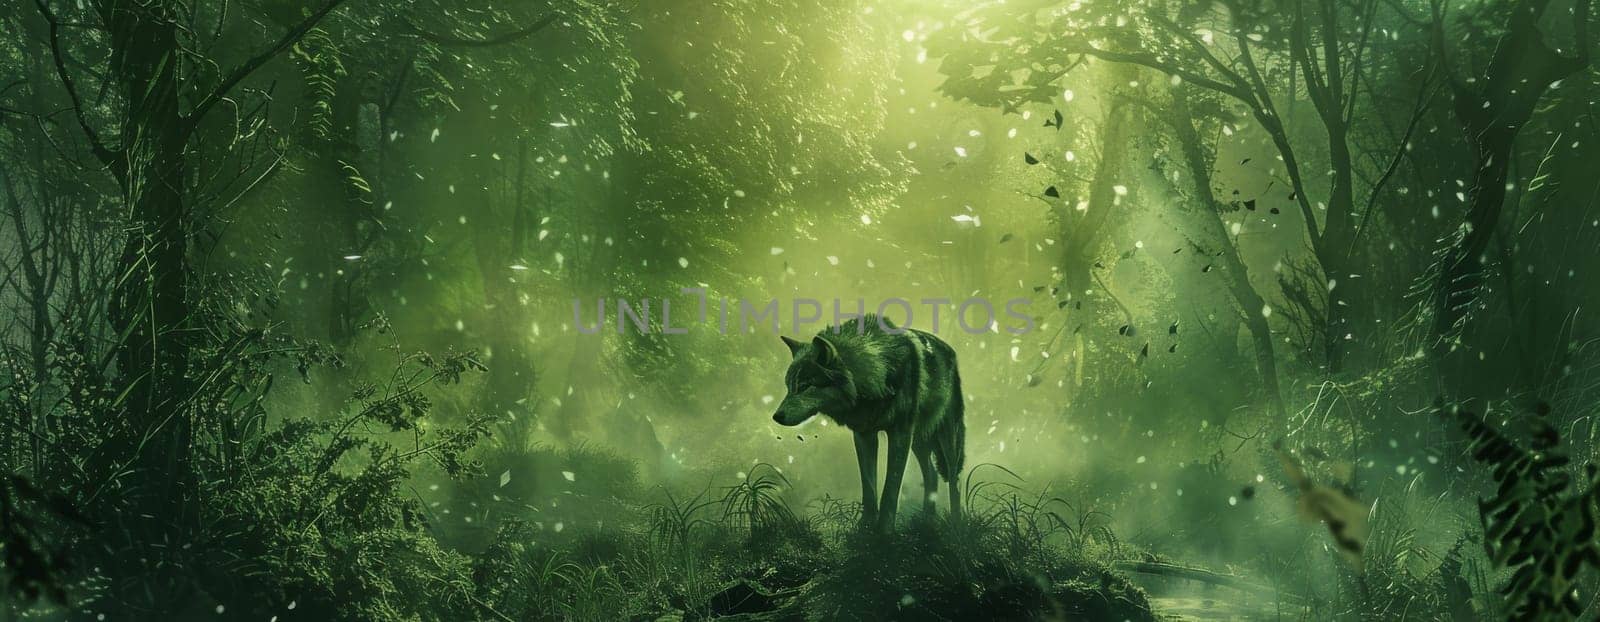 A wolf standing amidst trees in a forest setting by Kadula